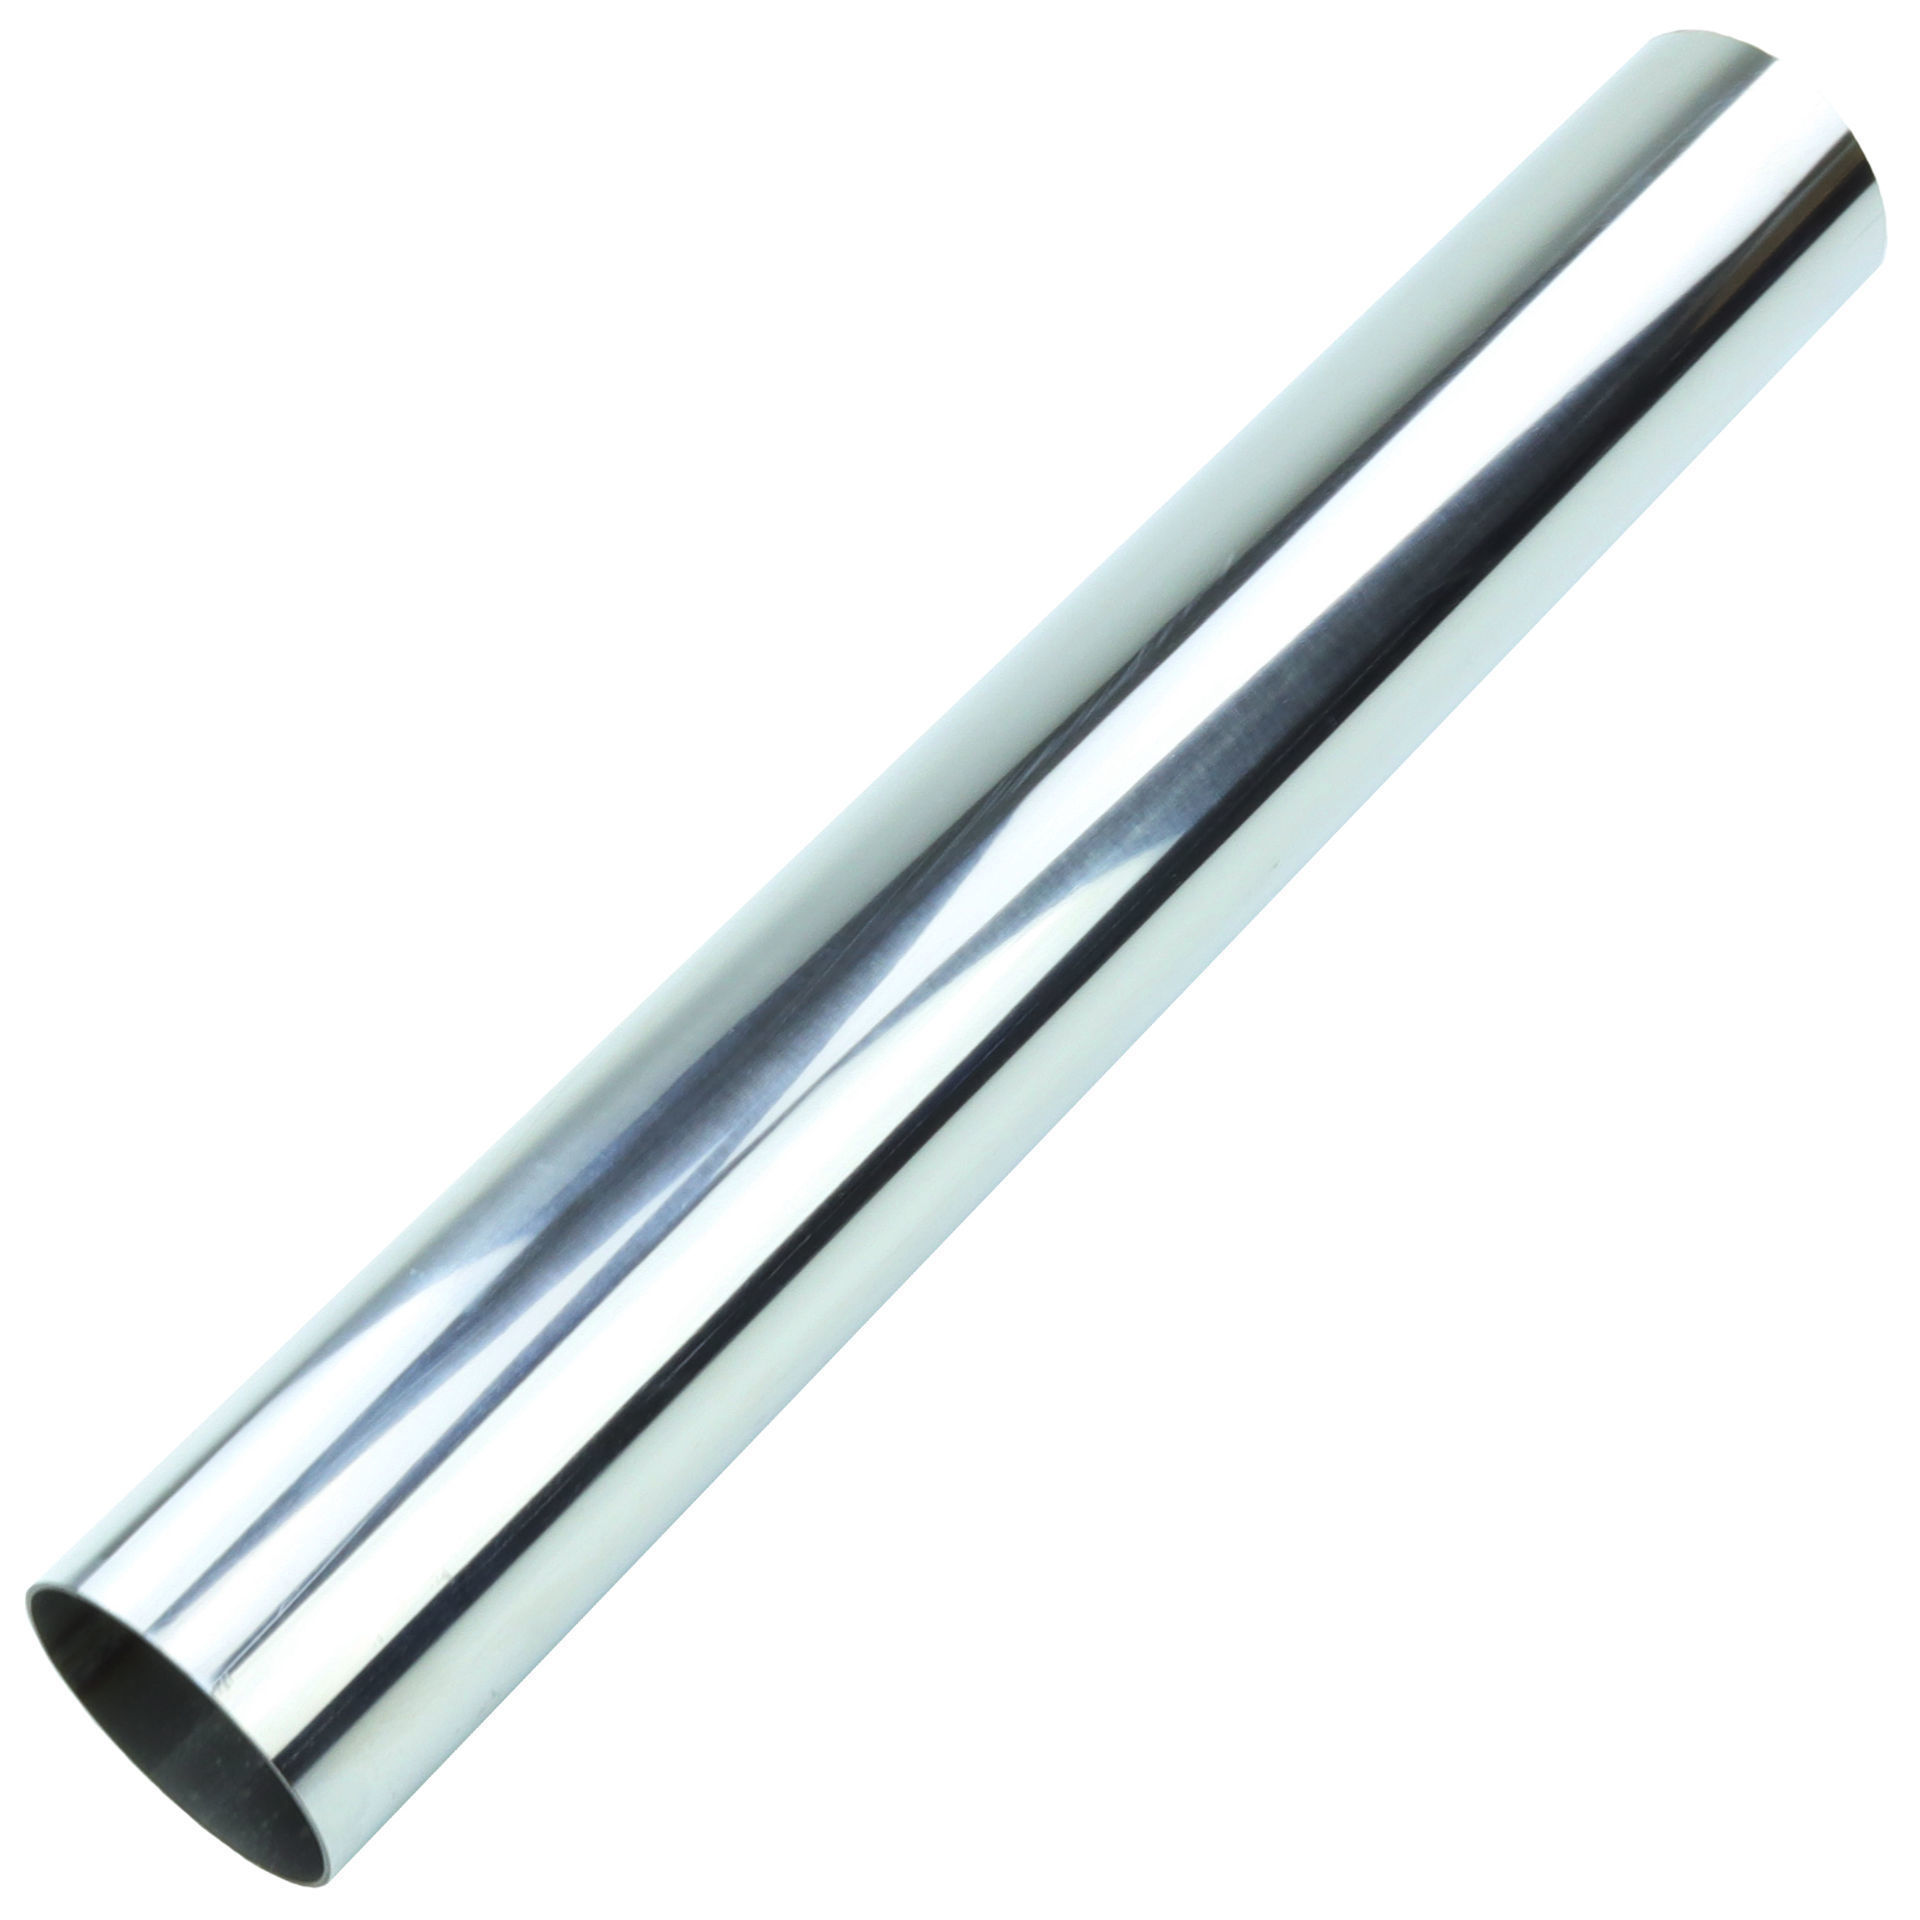 1/2 Meter Length 5 inches OD 500mm Exhaust Repair Stainless Steel Tube 127mm 